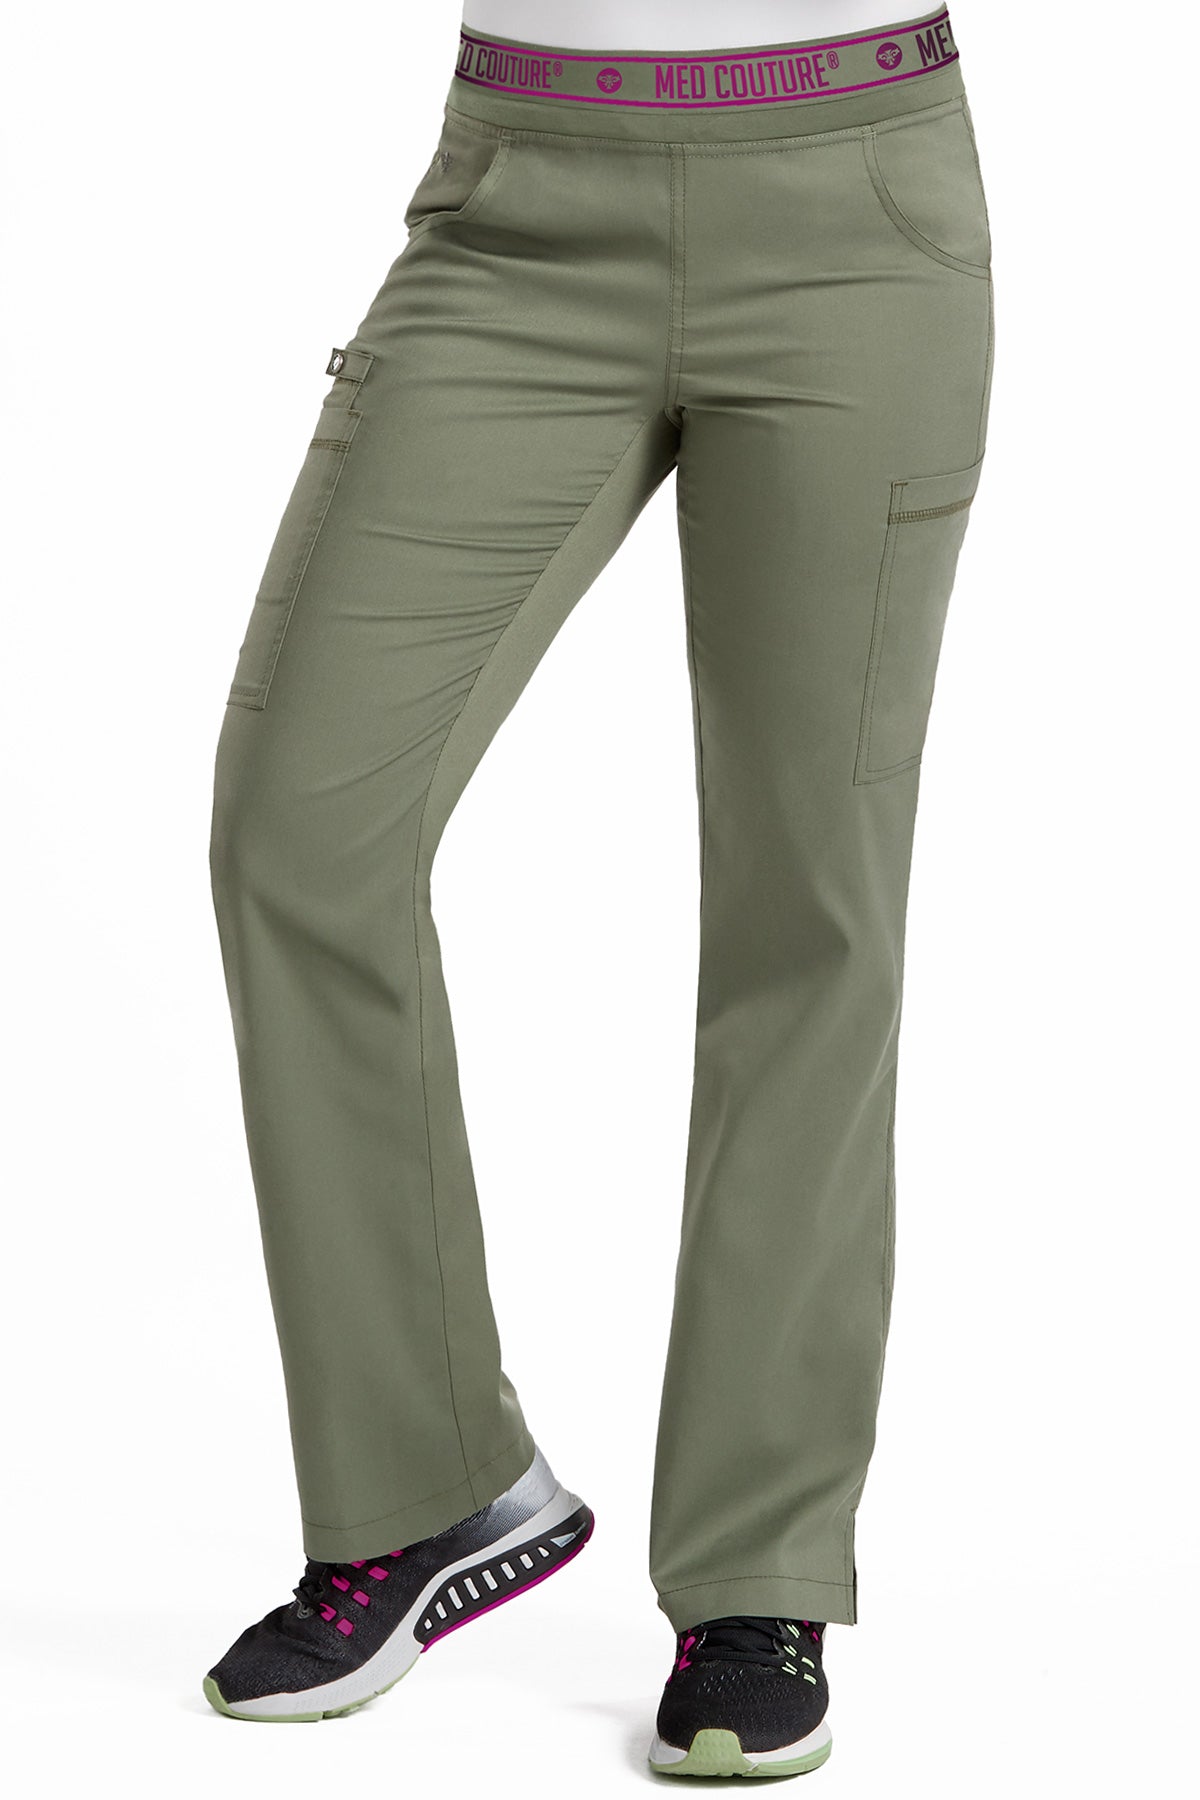 Med Couture Scrub Pants Touch Ally Yoga Pant in Olive at Parker's Clothing and Shoes.